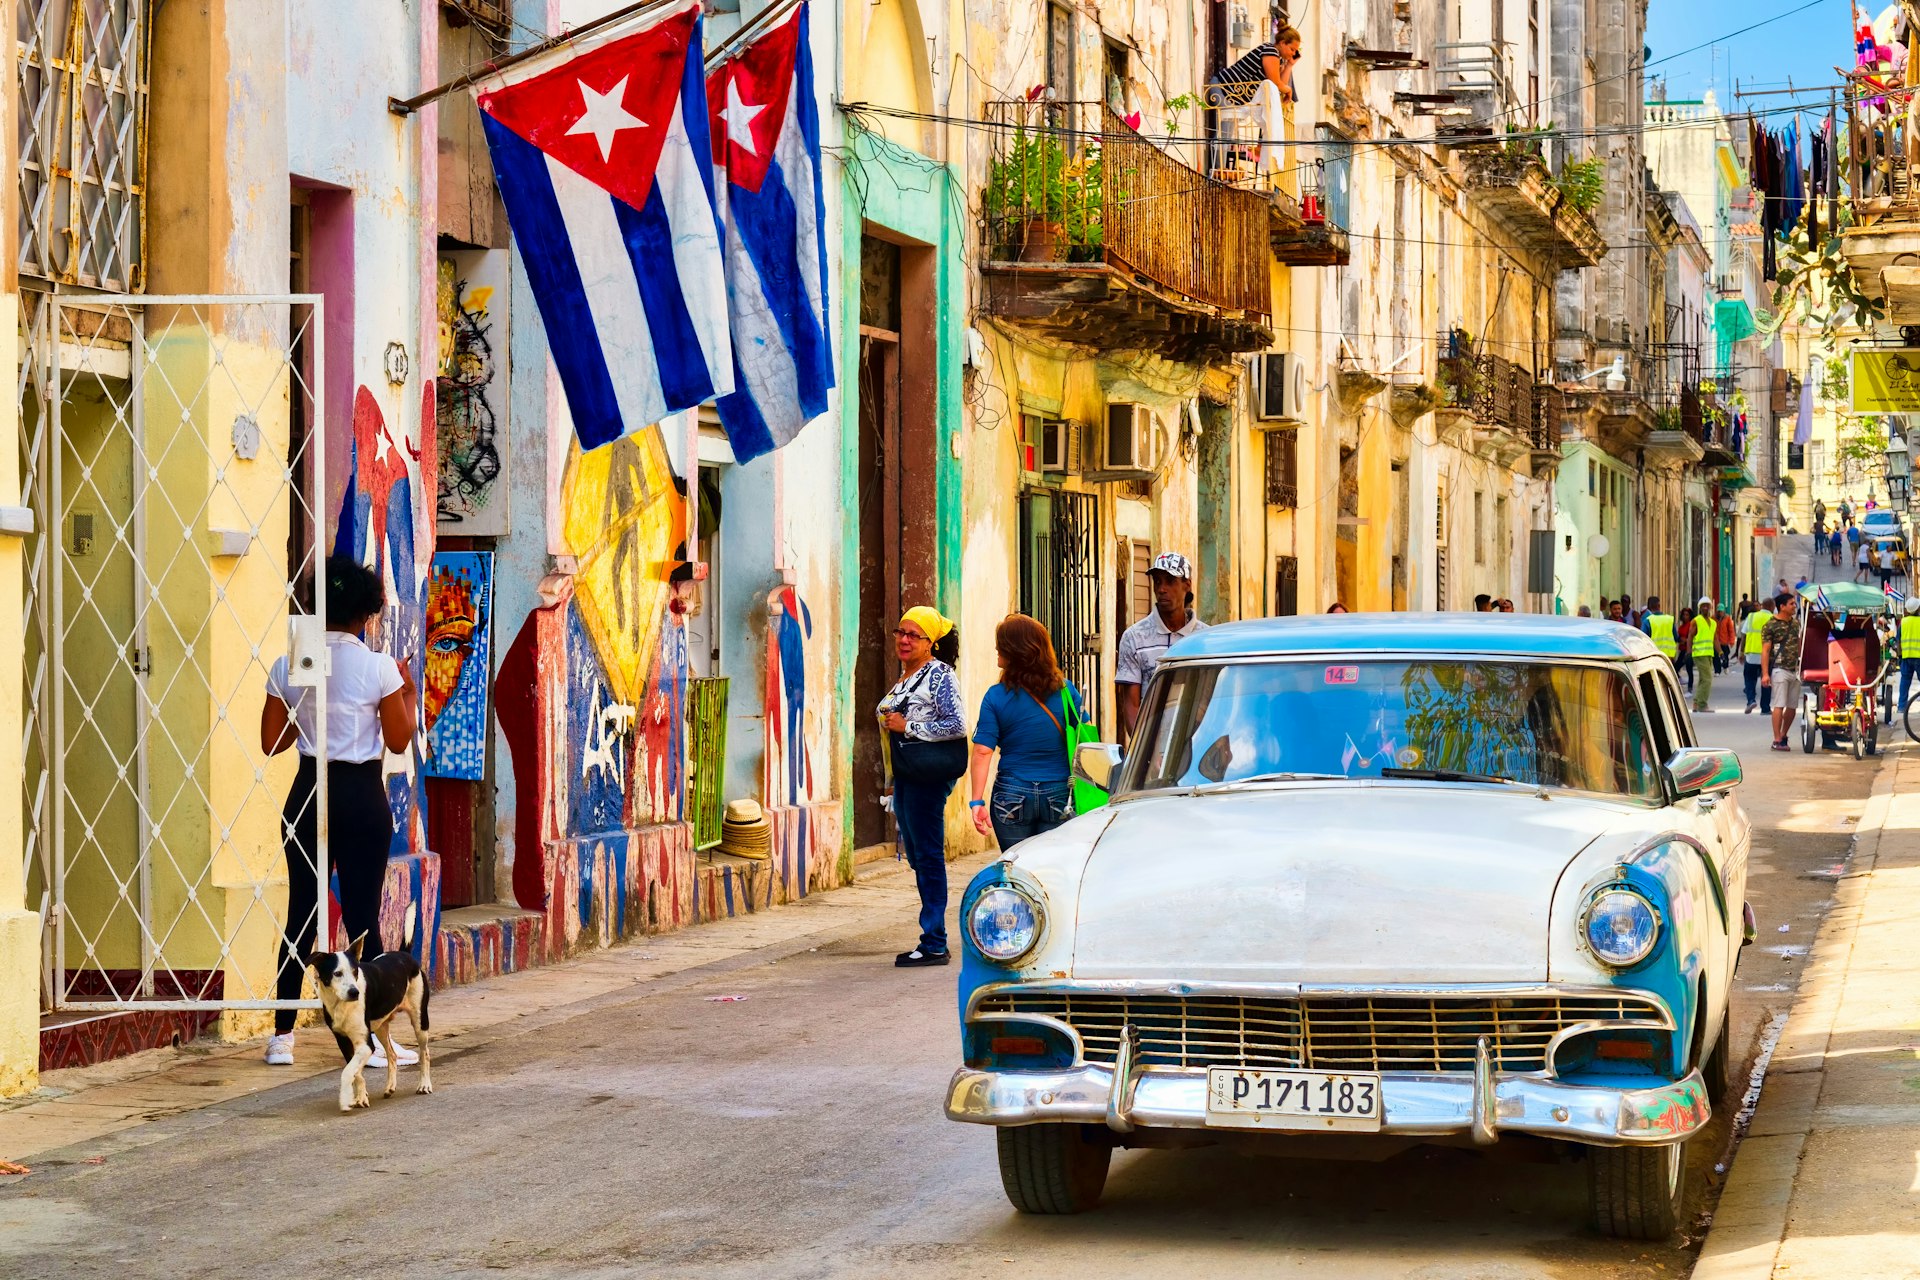 Cuba announces reopening plans but visitors to Havana will have to wait until phase three.